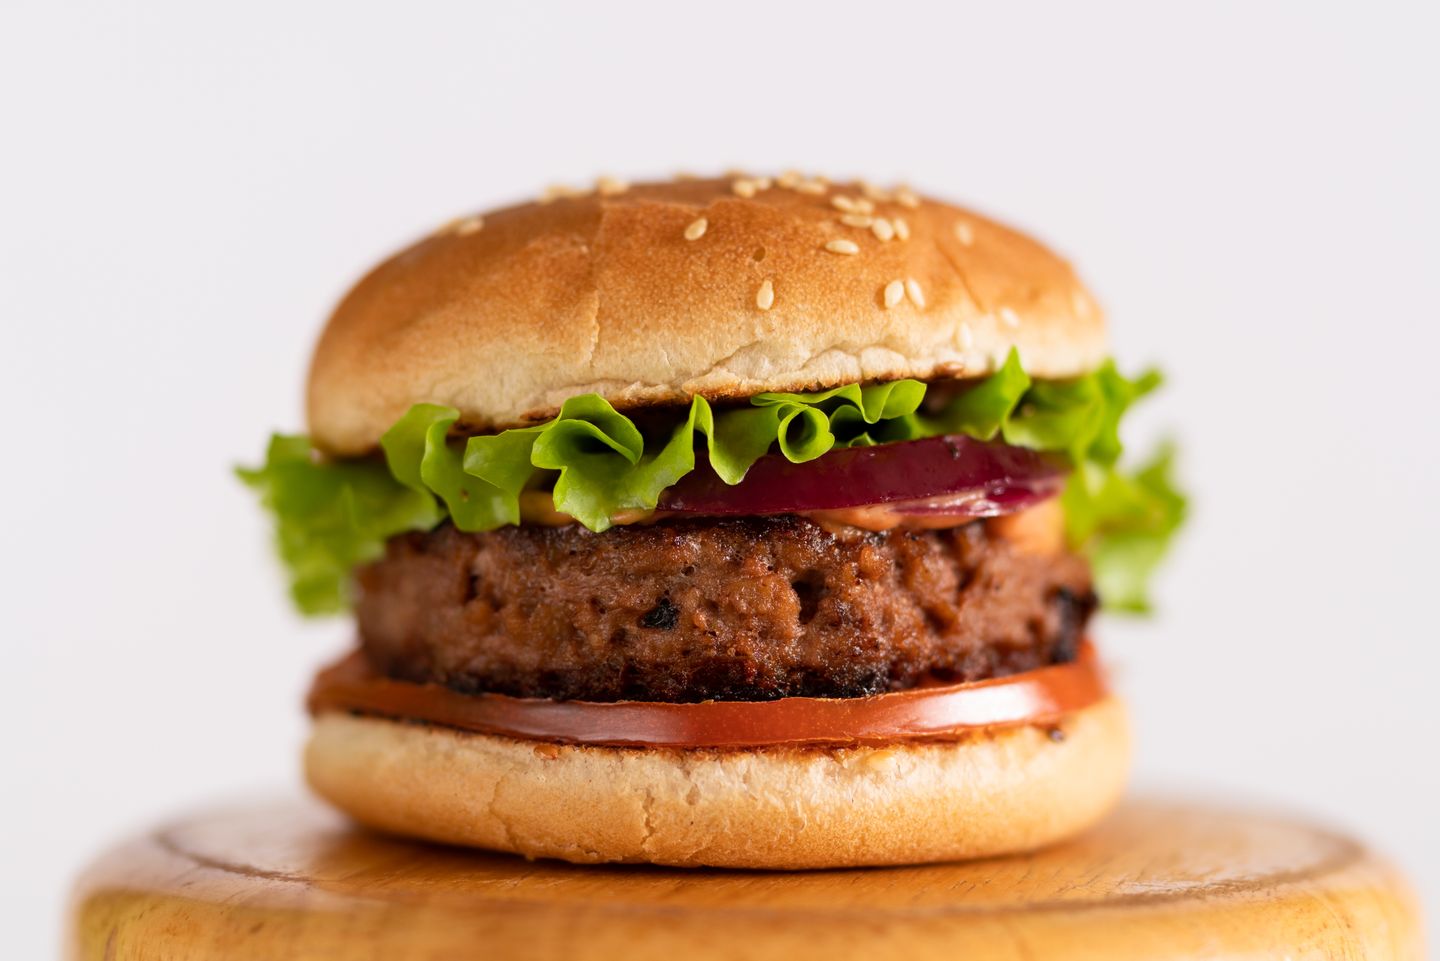 the food supply chain enables meatless meat.